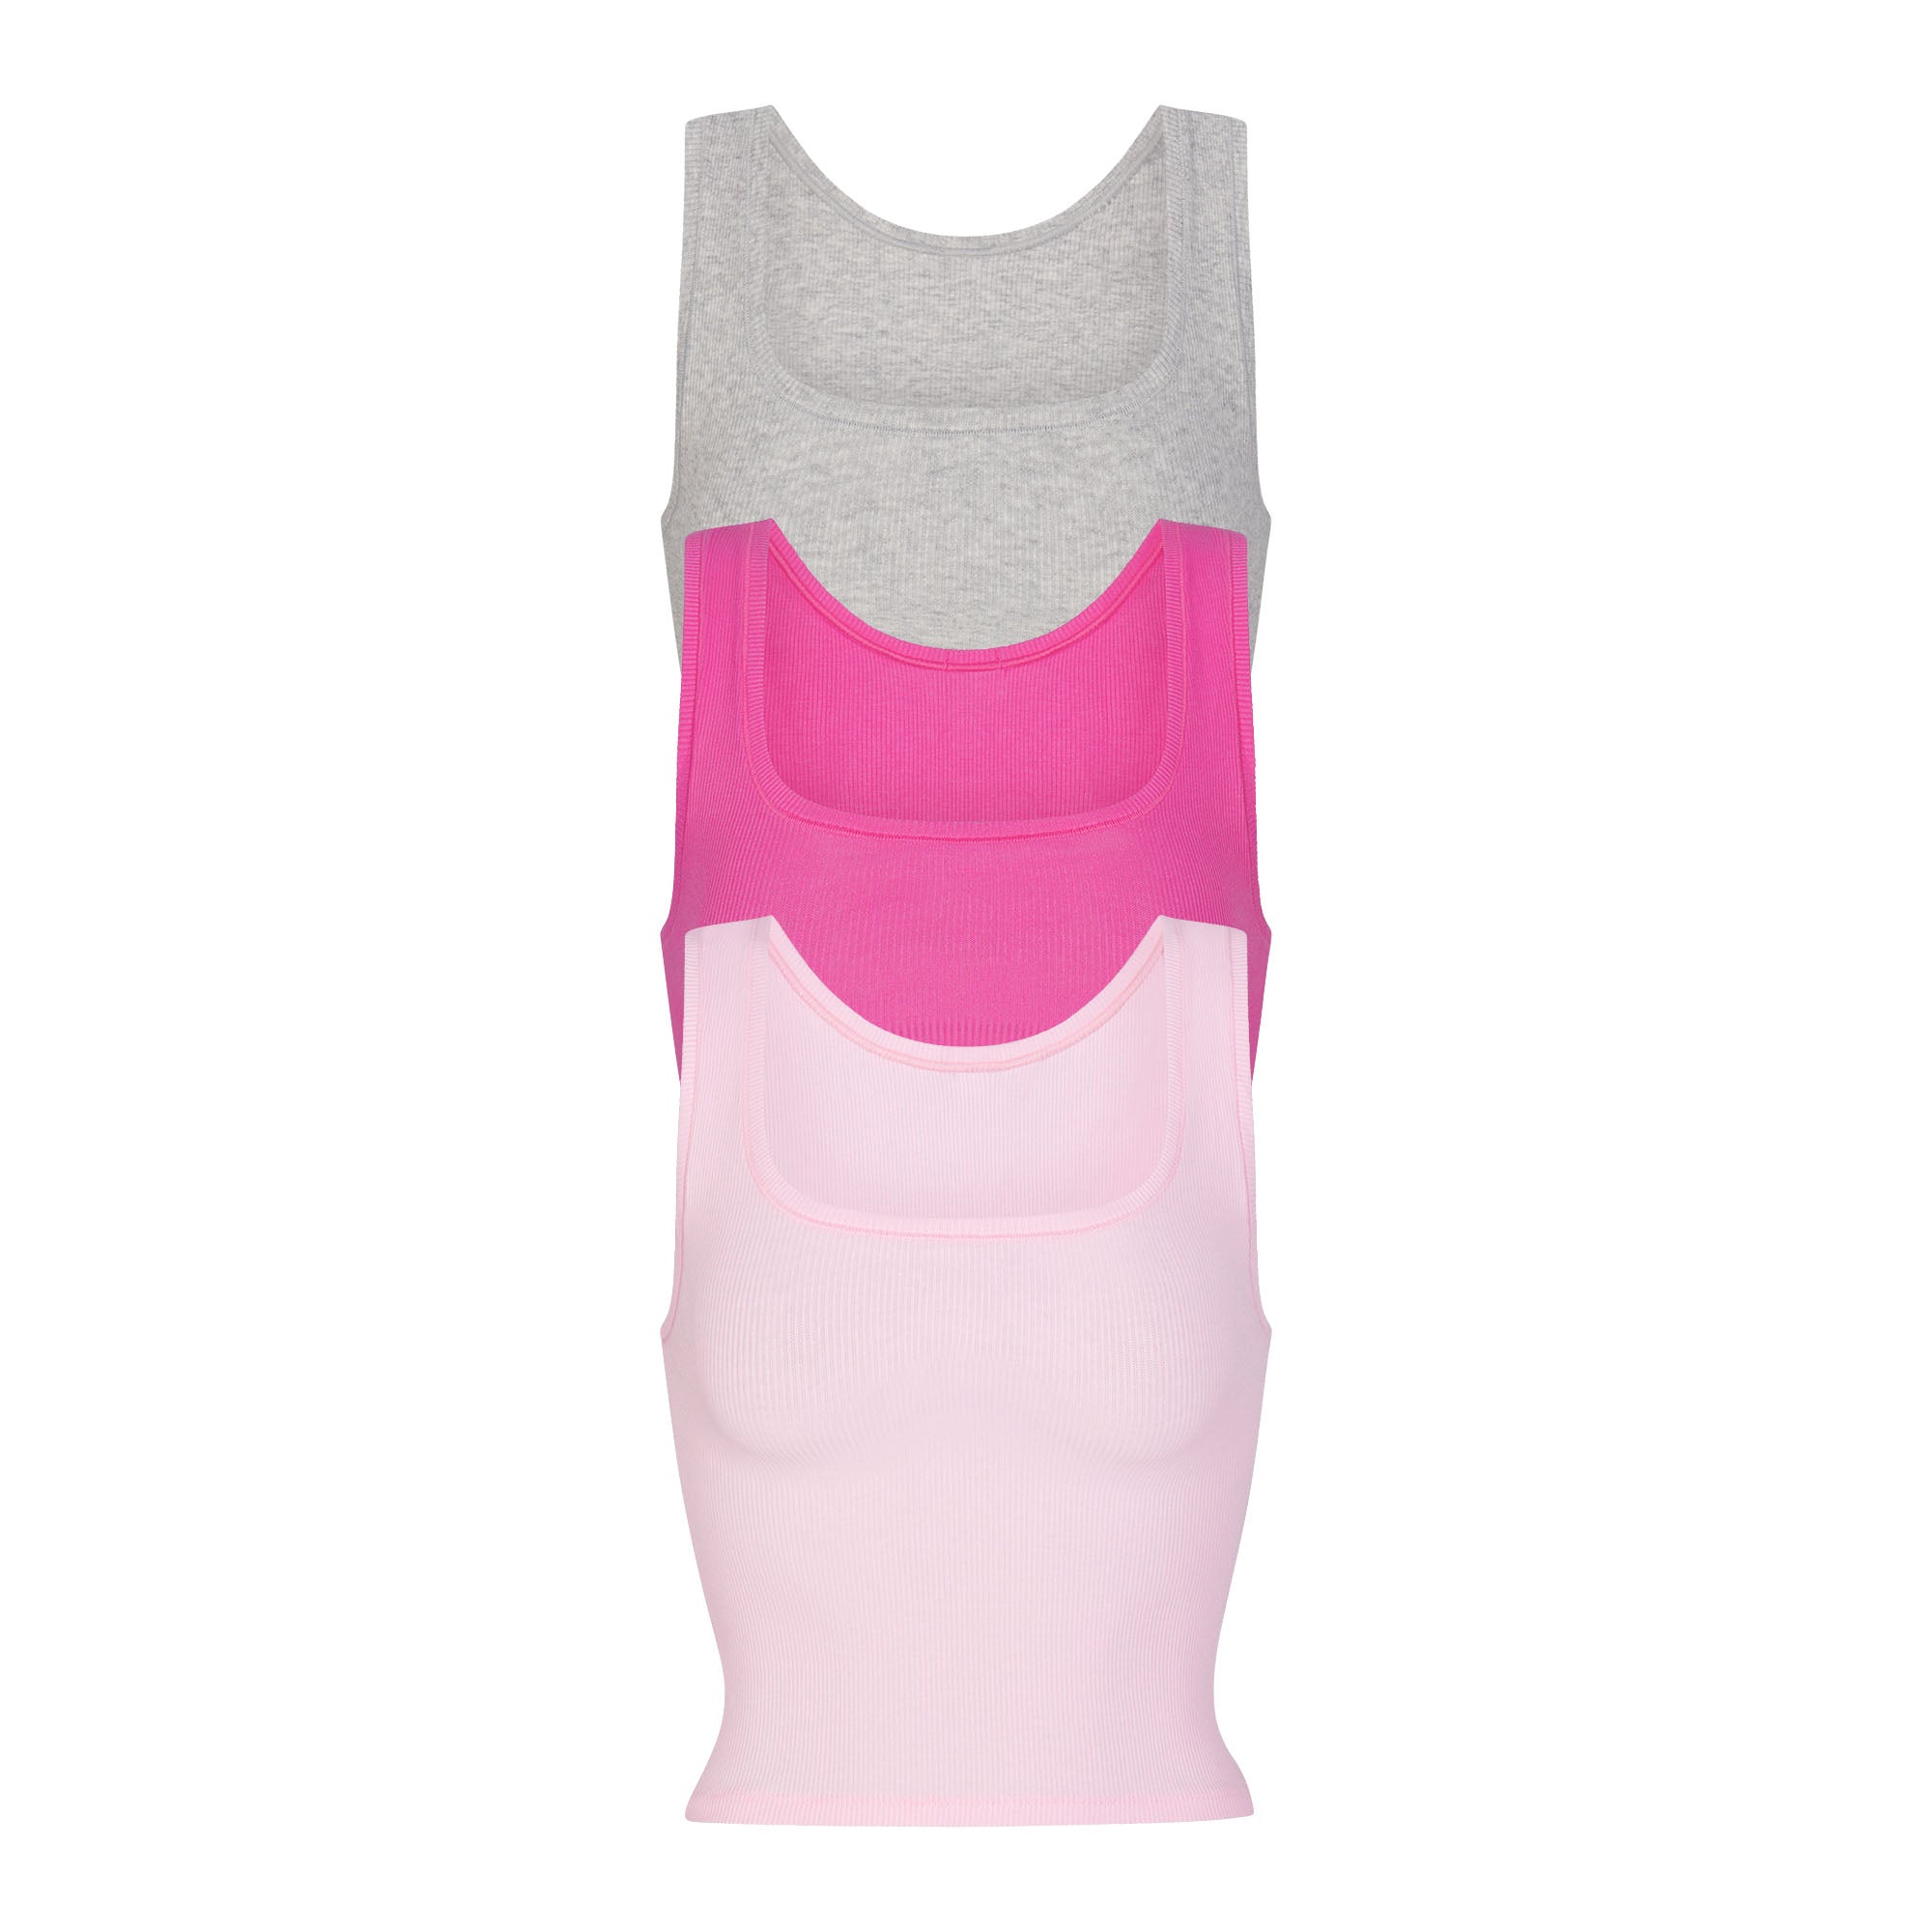 SKIMS cozy knit Tank top Pink Size M - $23 - From Middle